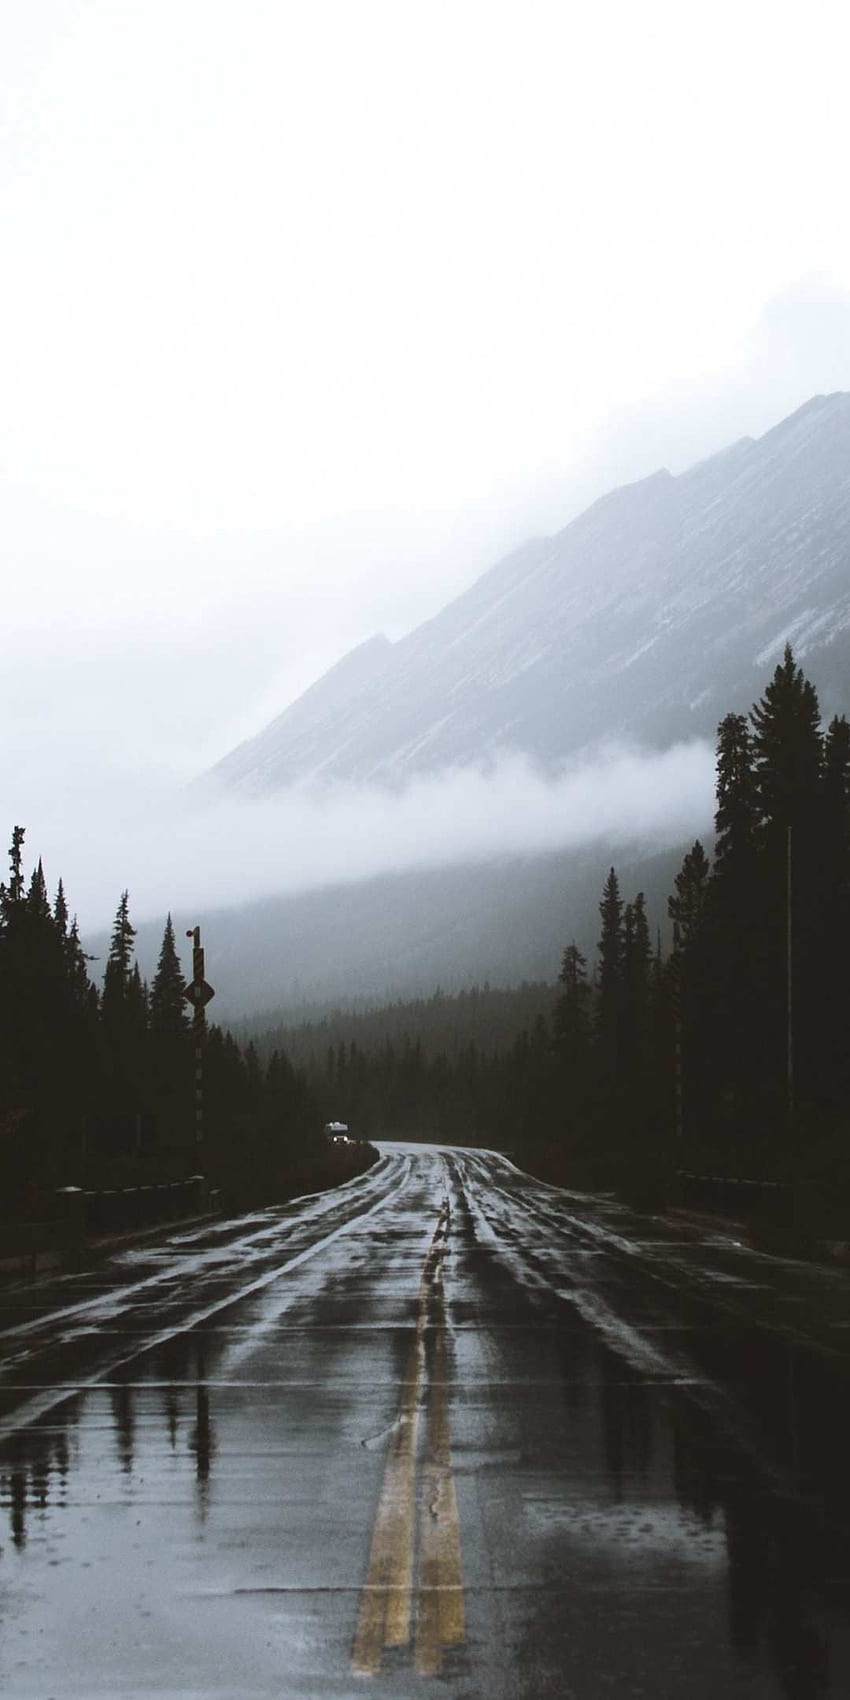 Gloomy Pictures  Download Free Images on Unsplash